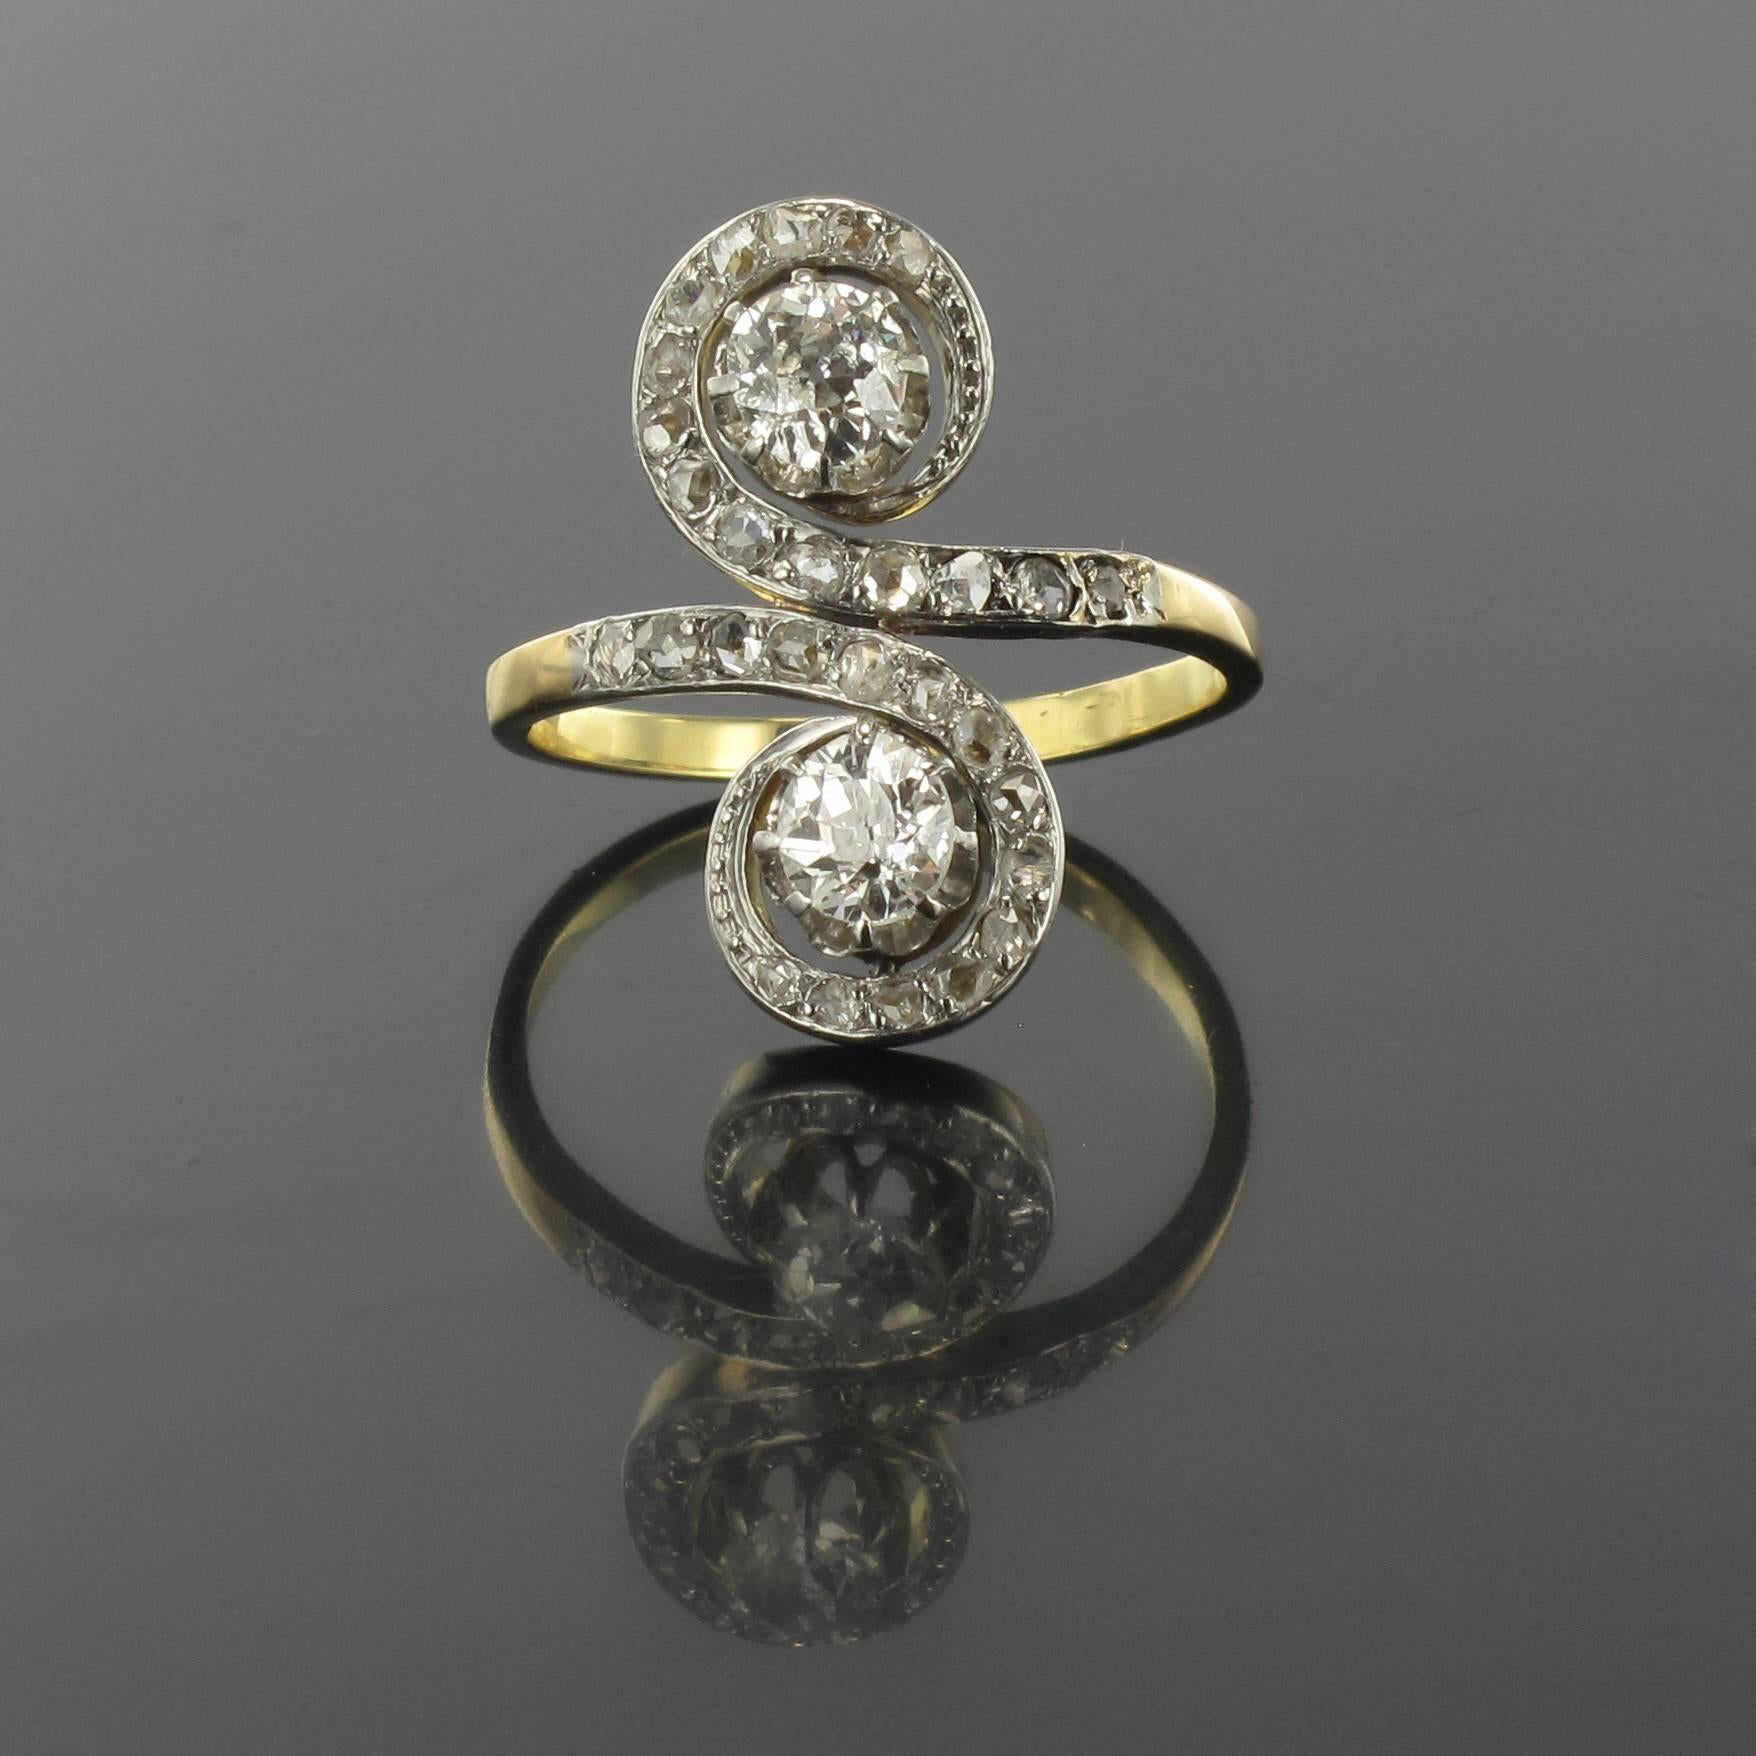 Ring in platinium and 18 carat yellow gold, owl and grotesque hallmarks. 

This splendid Lovers Ring is claw set with 2 antique cut diamonds within the form of a letter ‘S’ set with rose cut diamonds reaching to the beginning of the ring band.